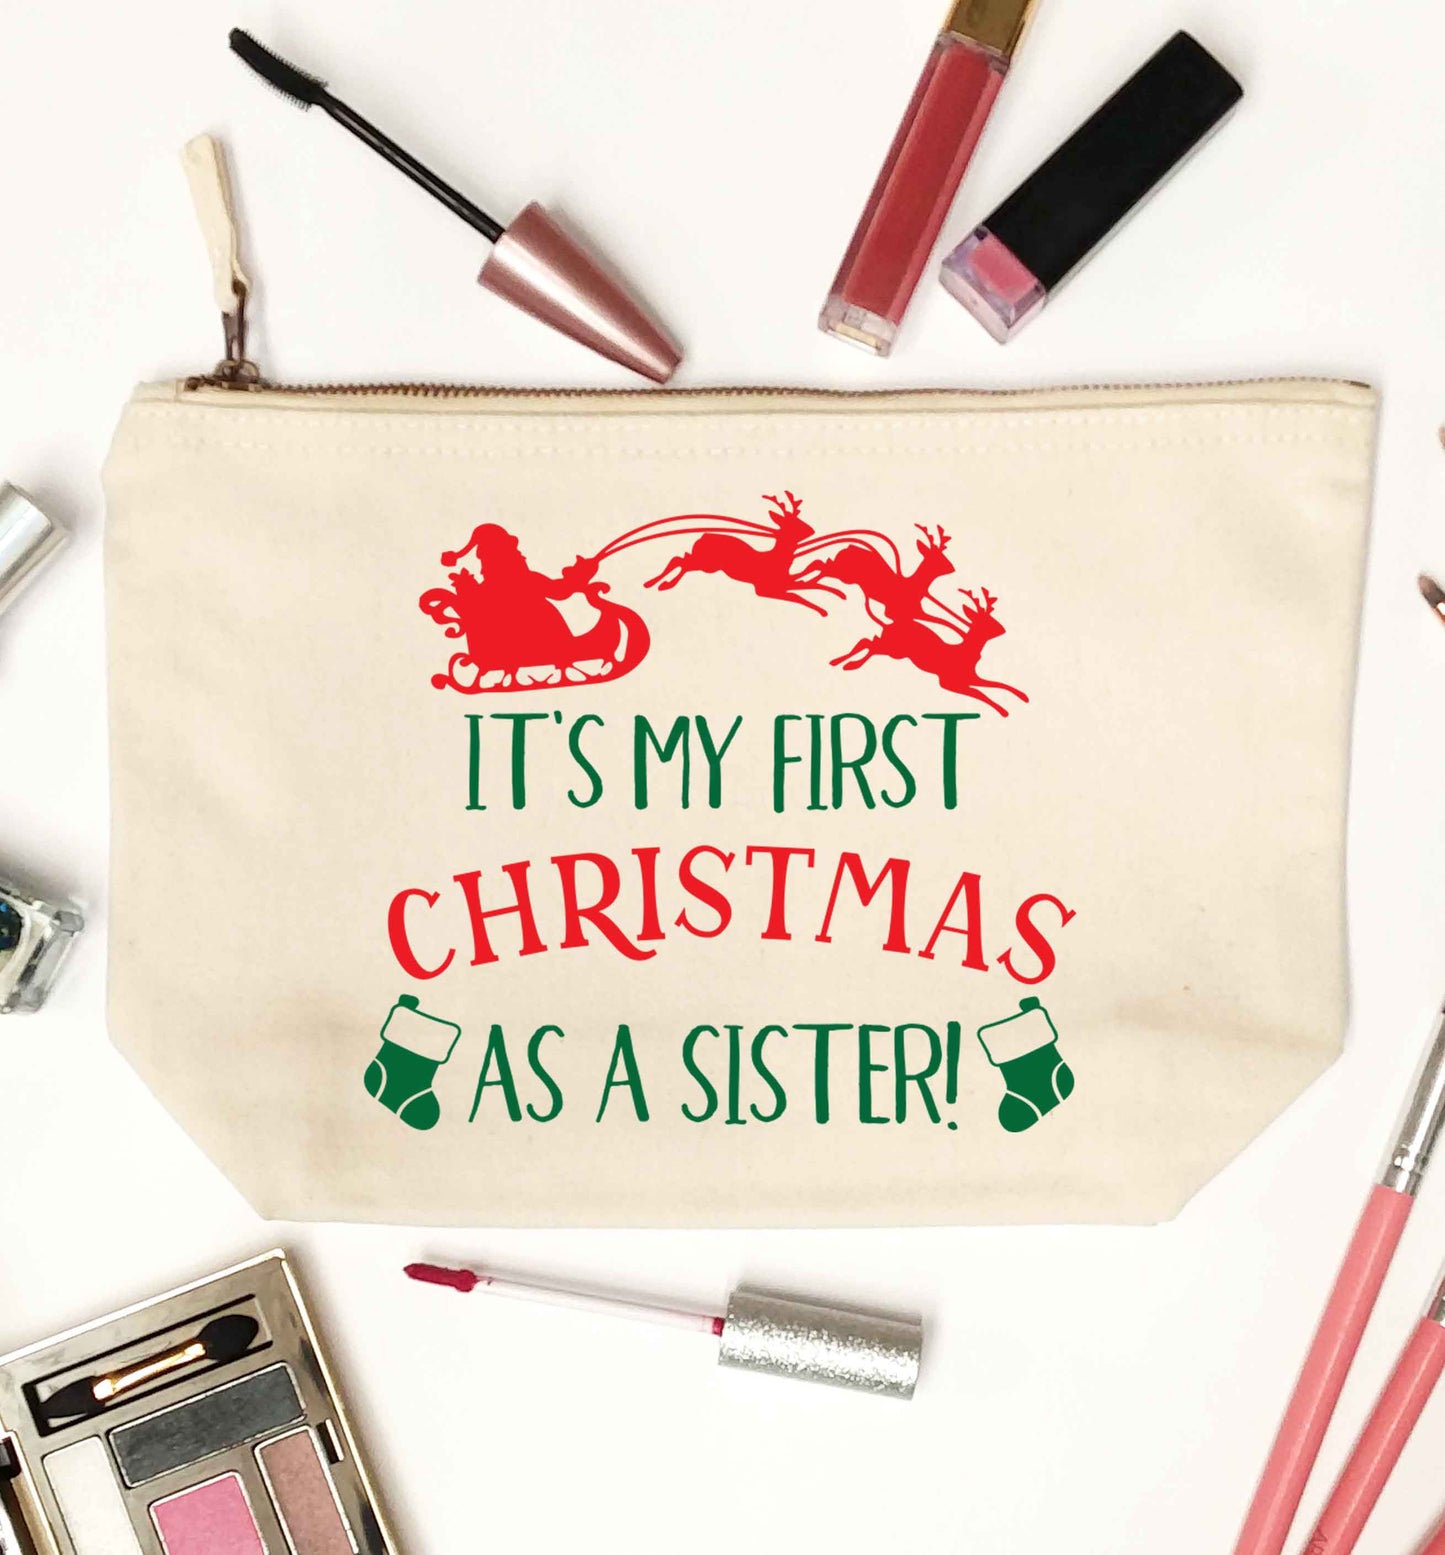 It's my first Christmas as a sister! natural makeup bag